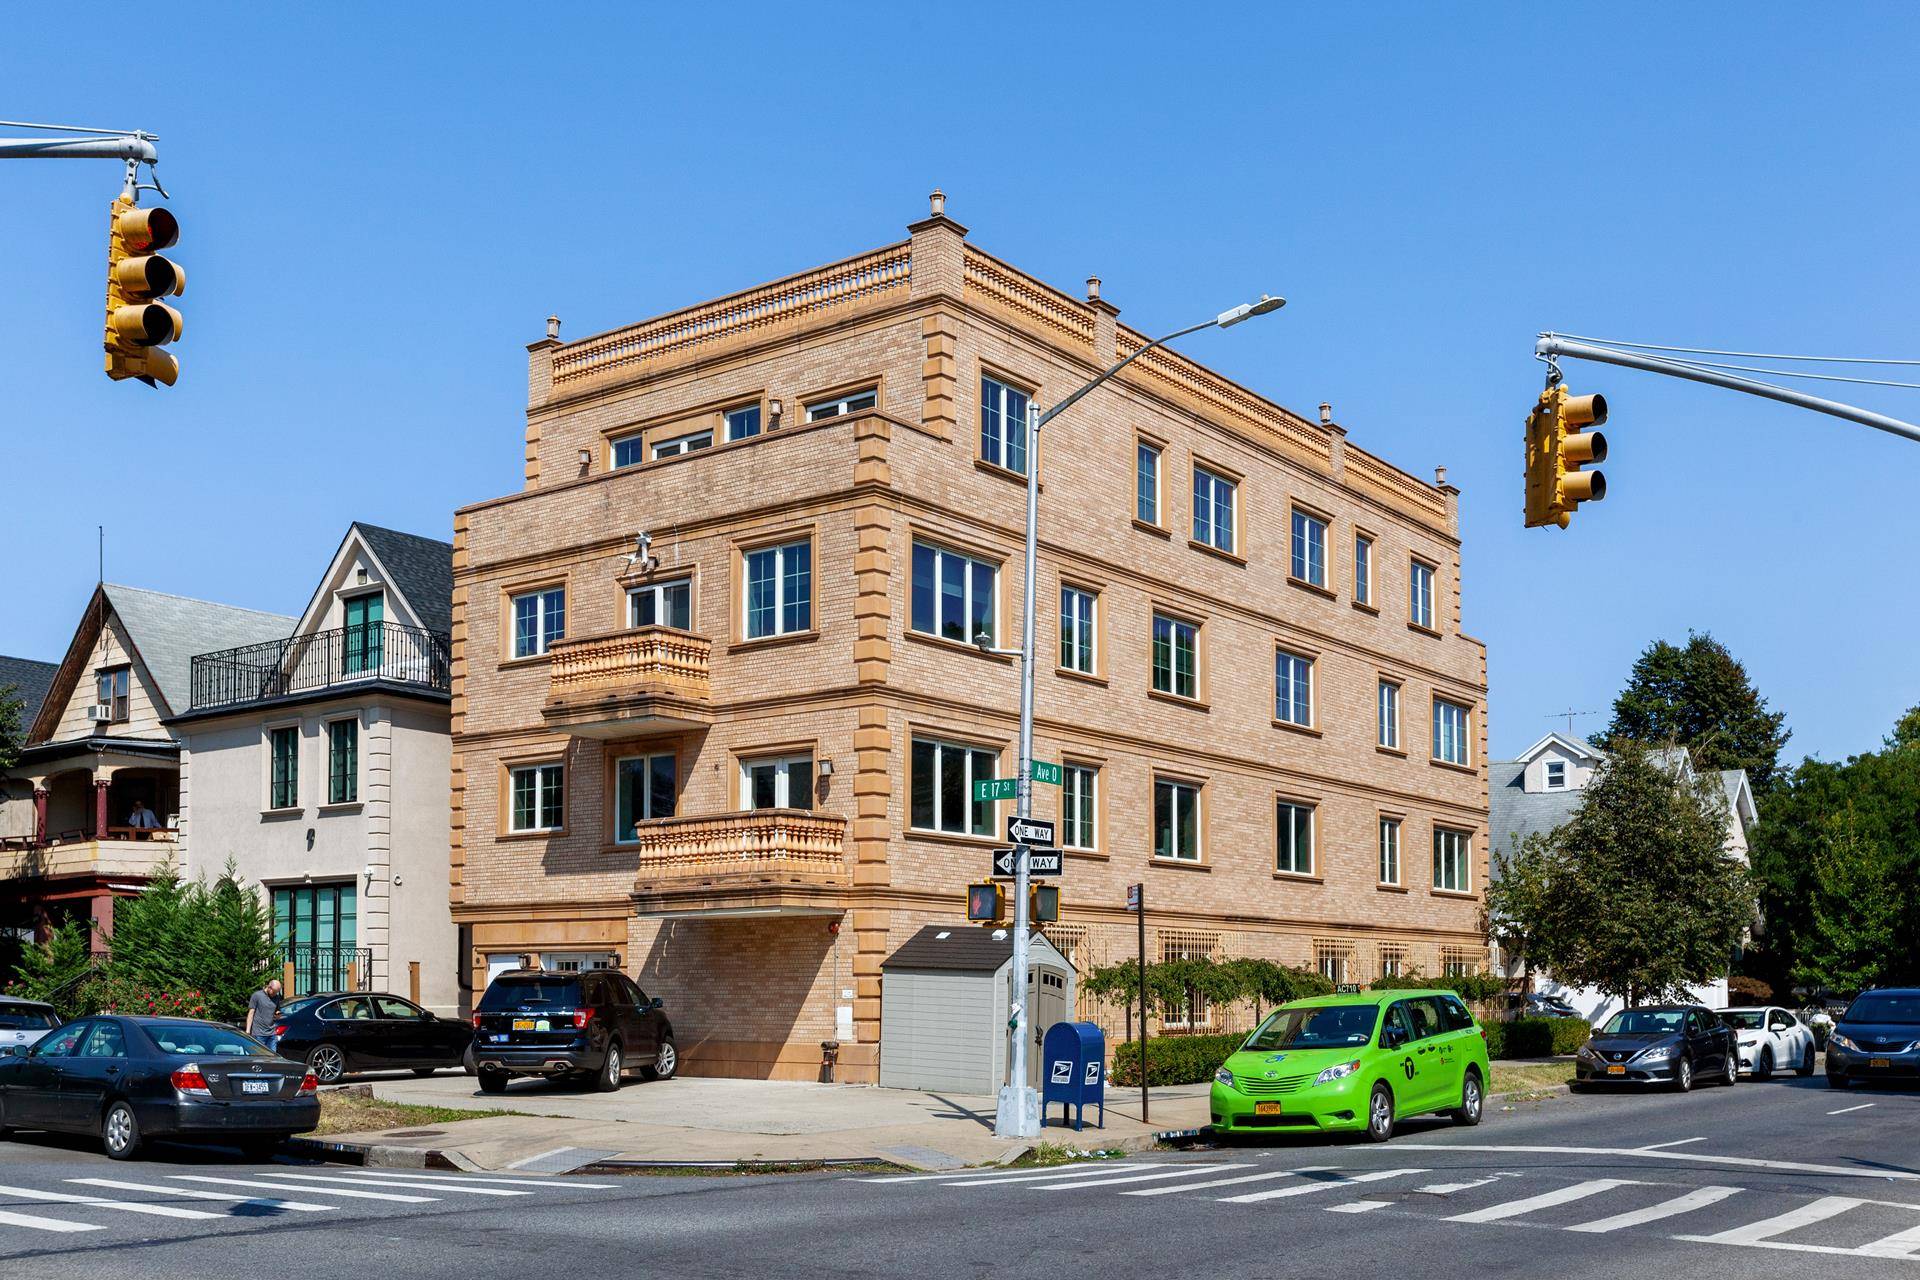 Introducing 1509 East 17th Street A Prime, Multi Family building with elevator in Midwood.